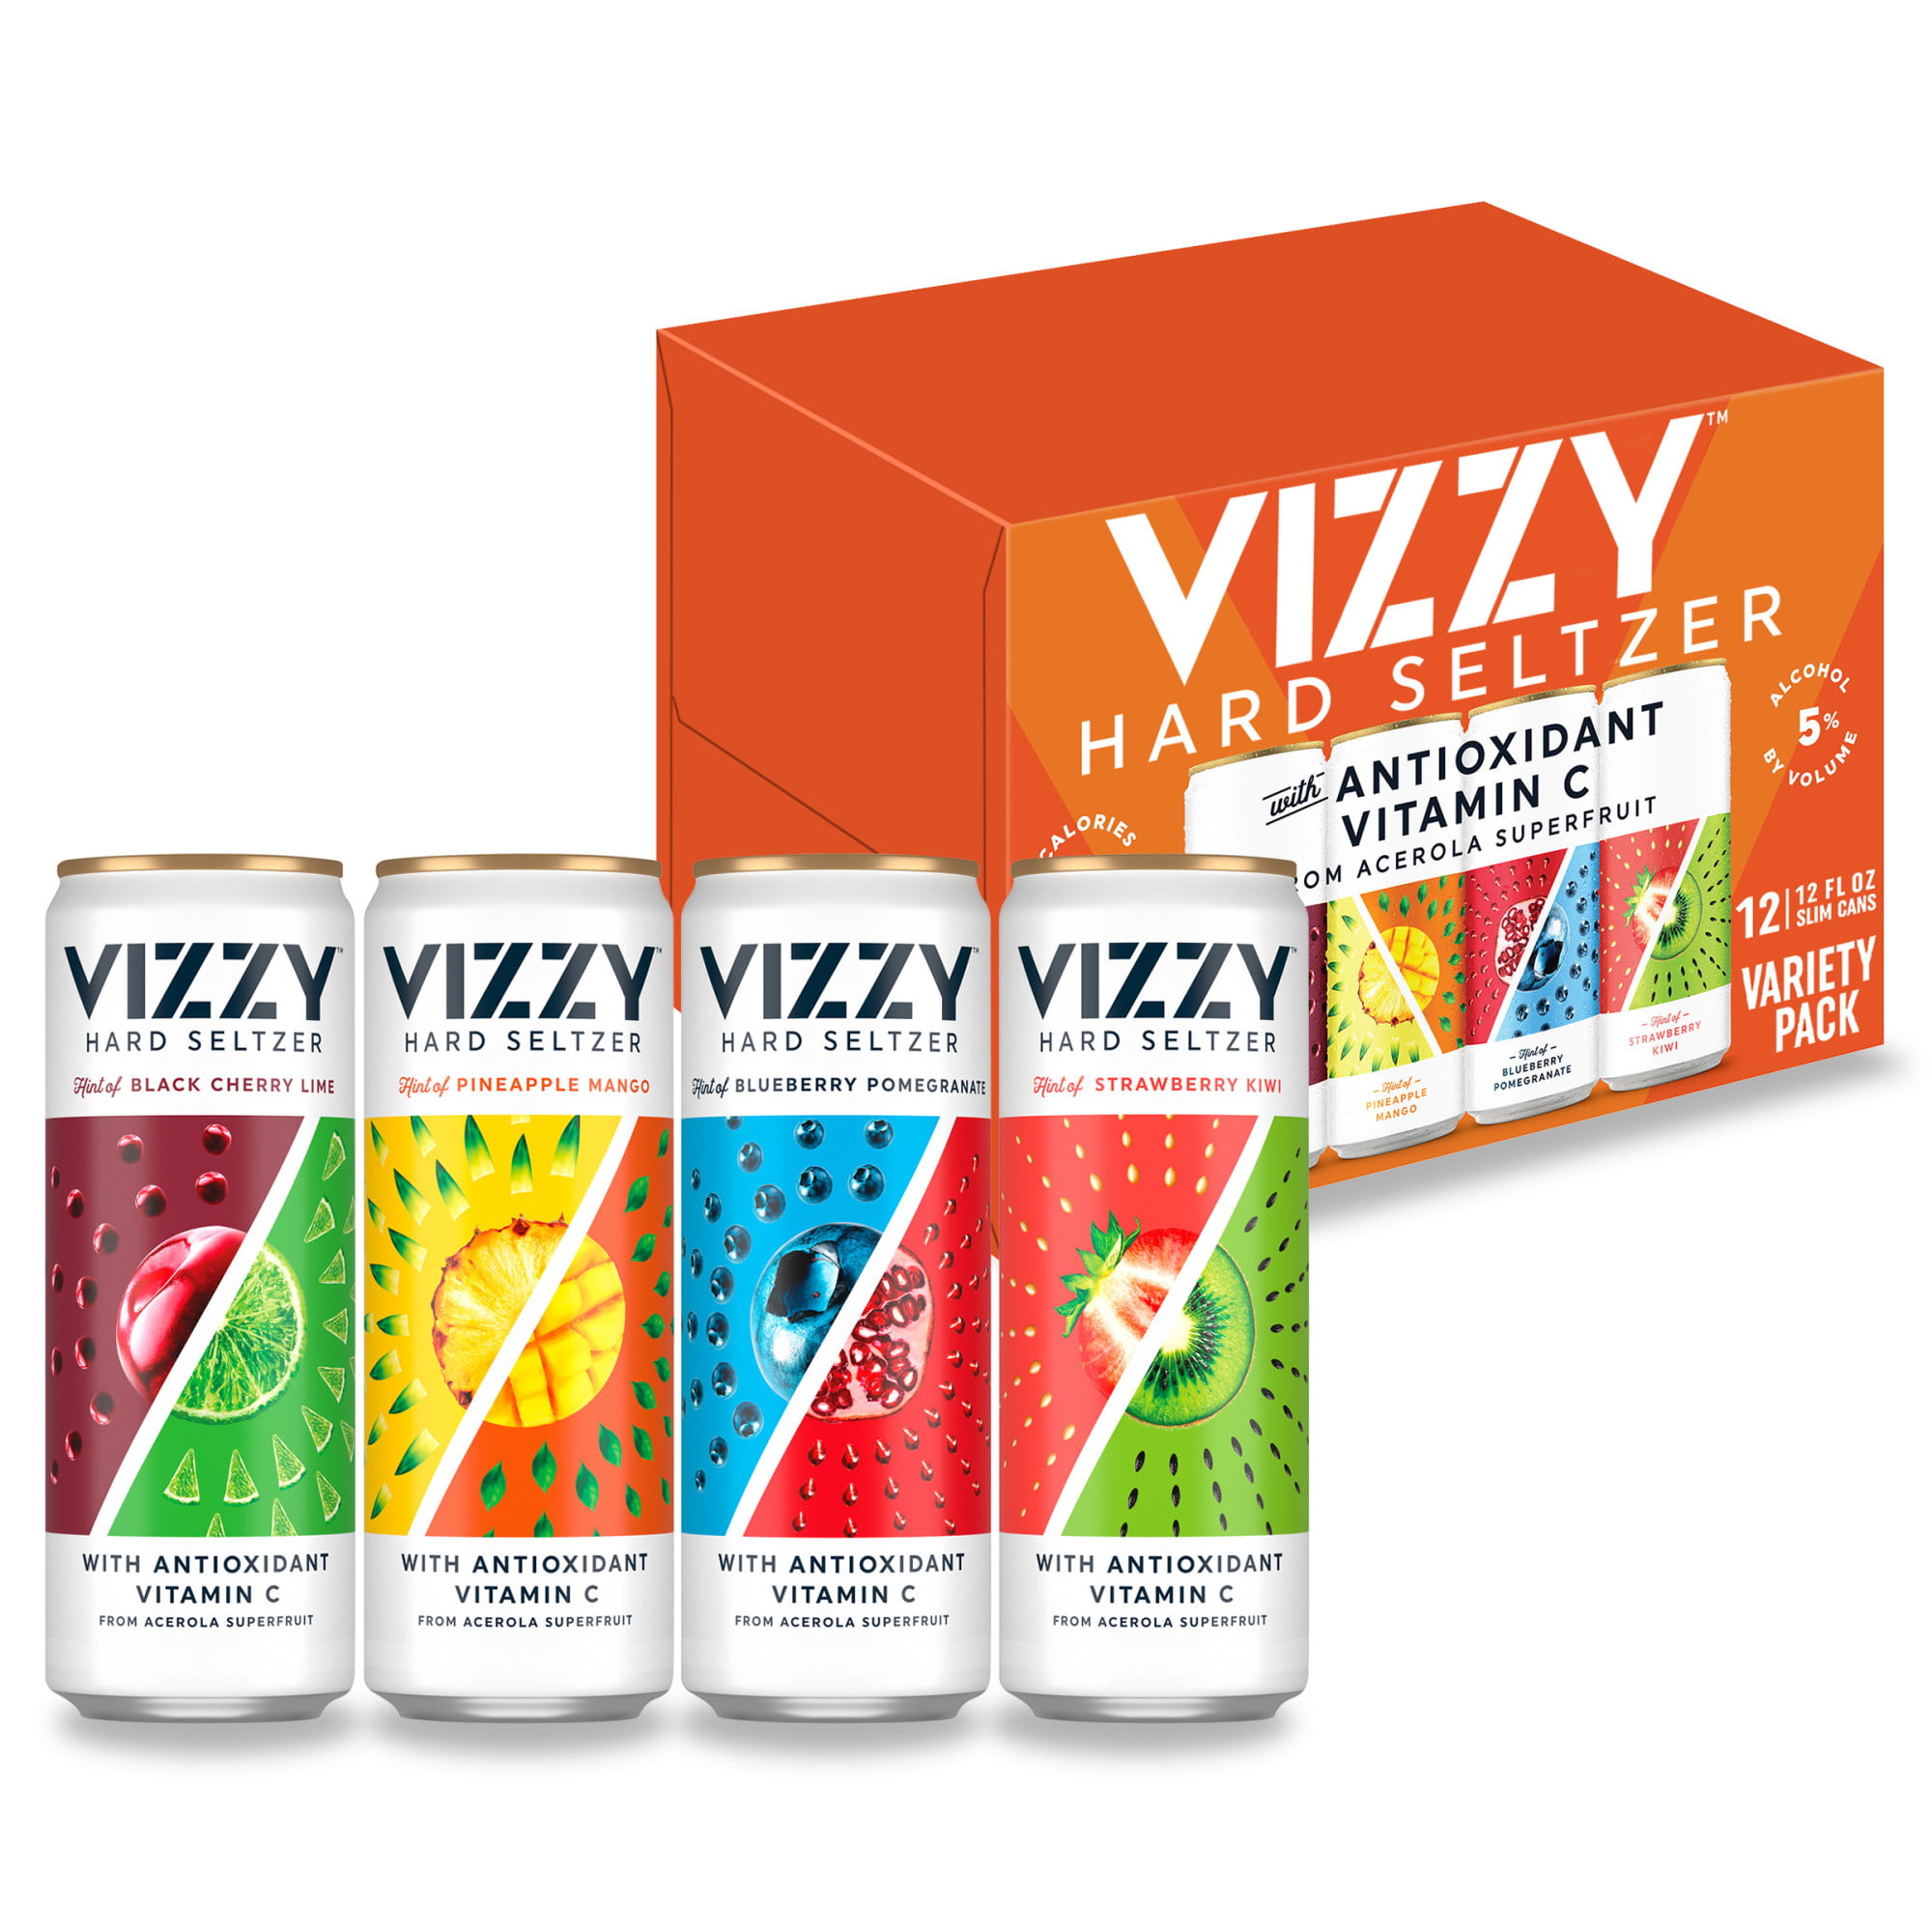 free-vizzy-hard-seltzer-after-rebate-select-states-ends-today